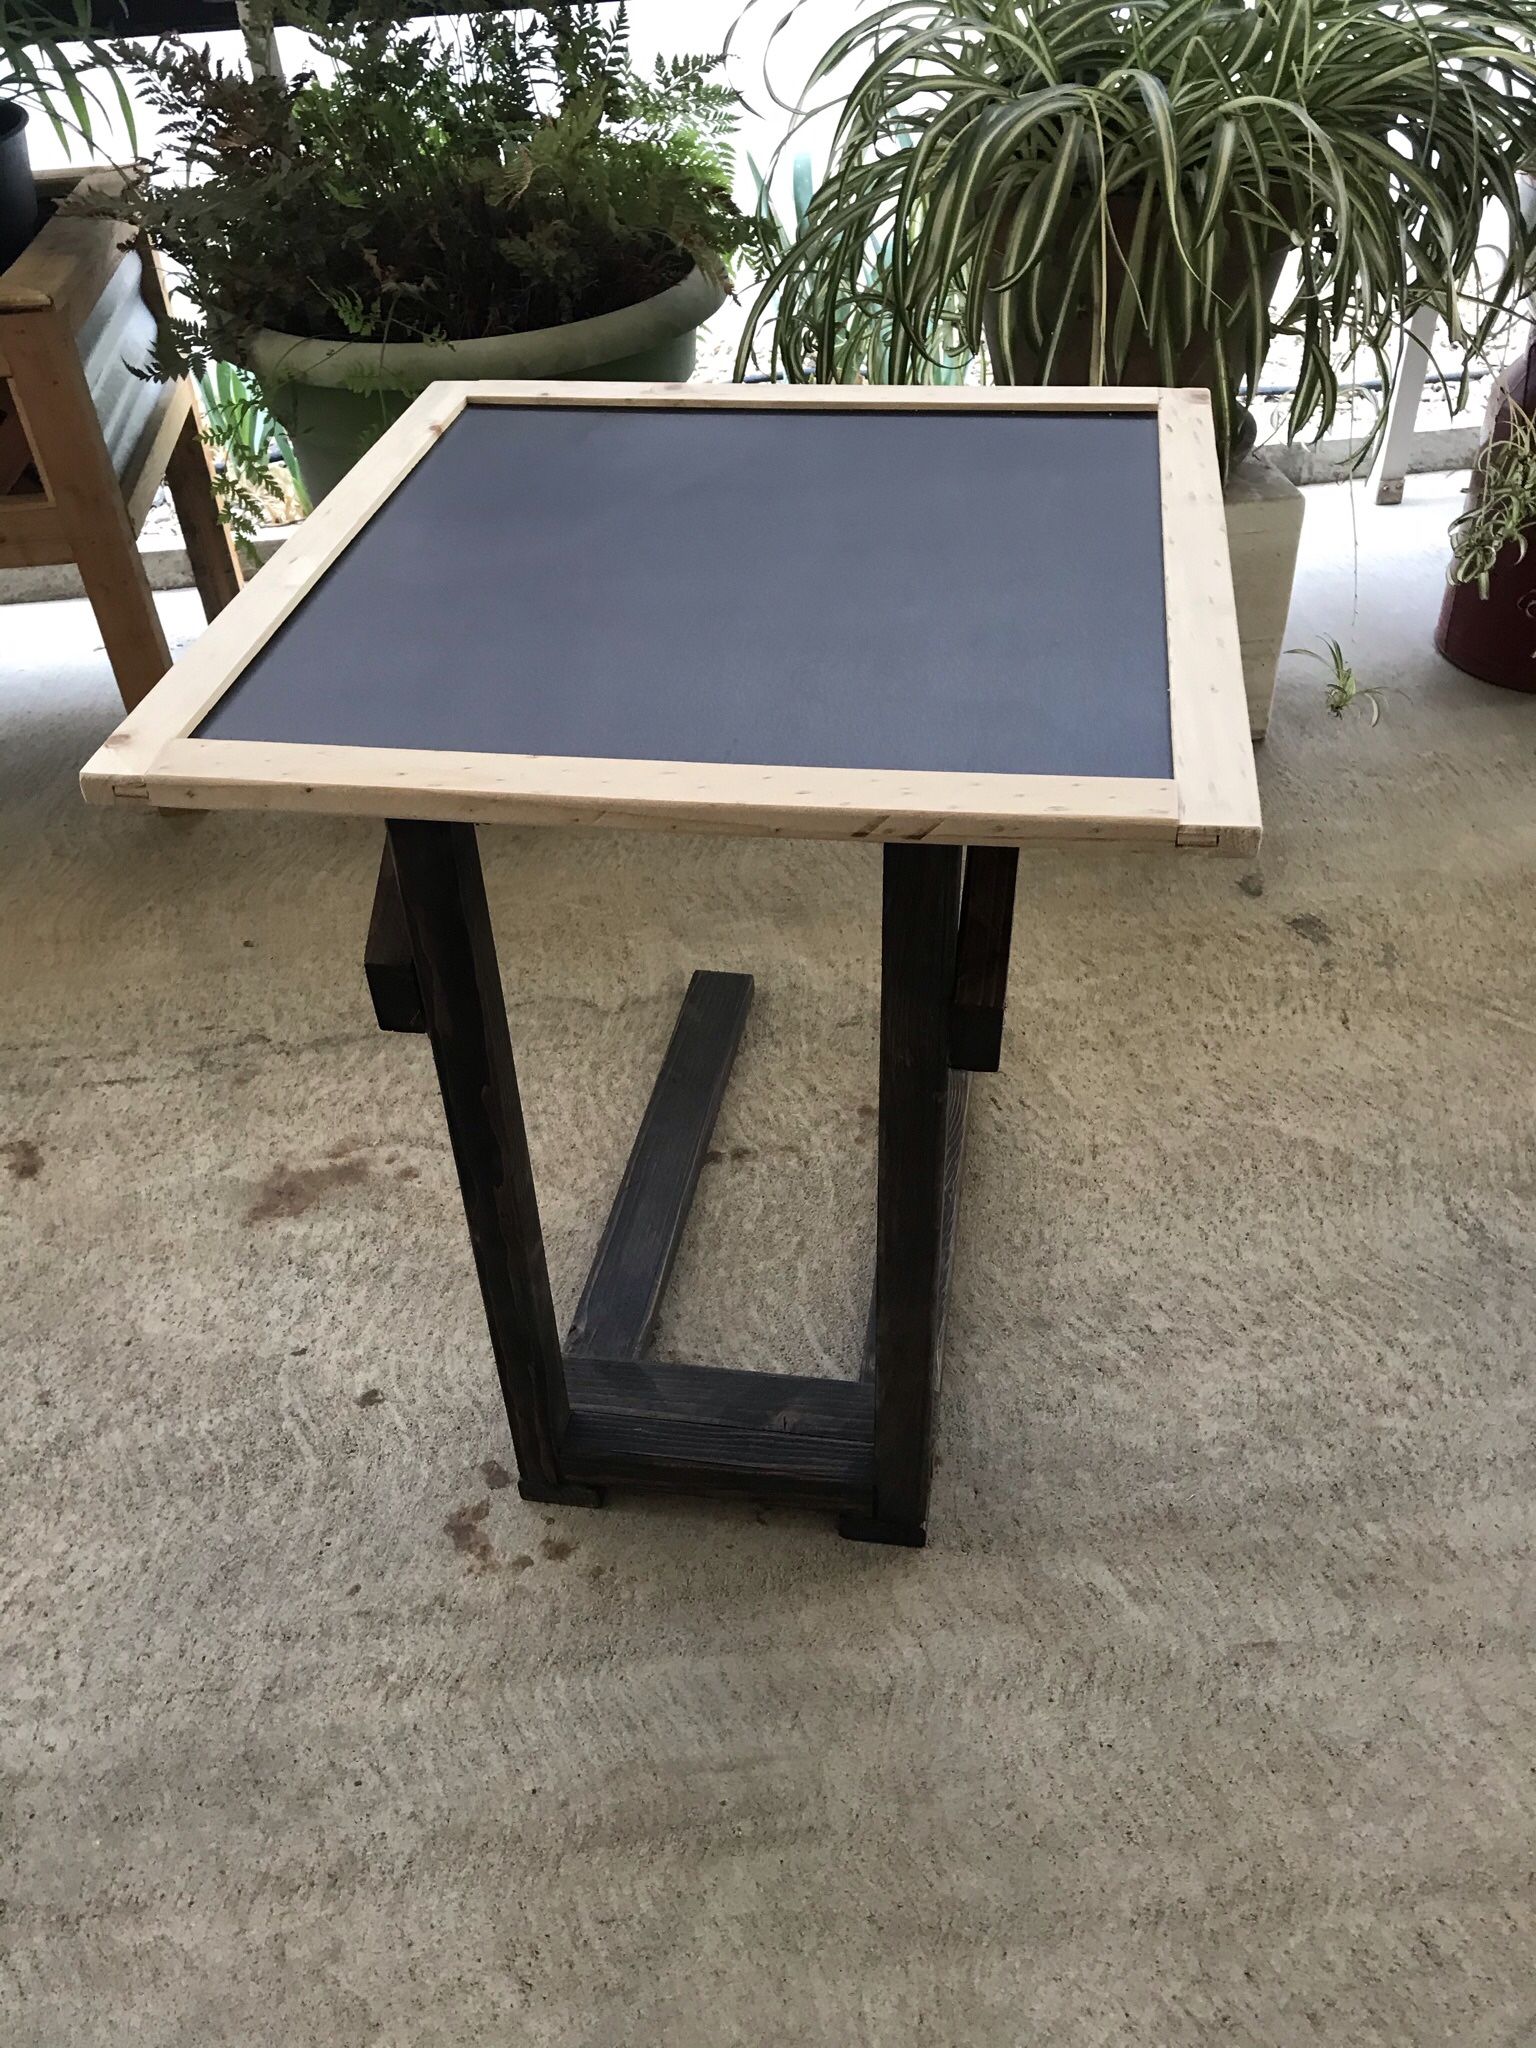 Portable Desk With Chalkboard Top Approx 2 Ft Square Height is For Standard Sofa Or Chair